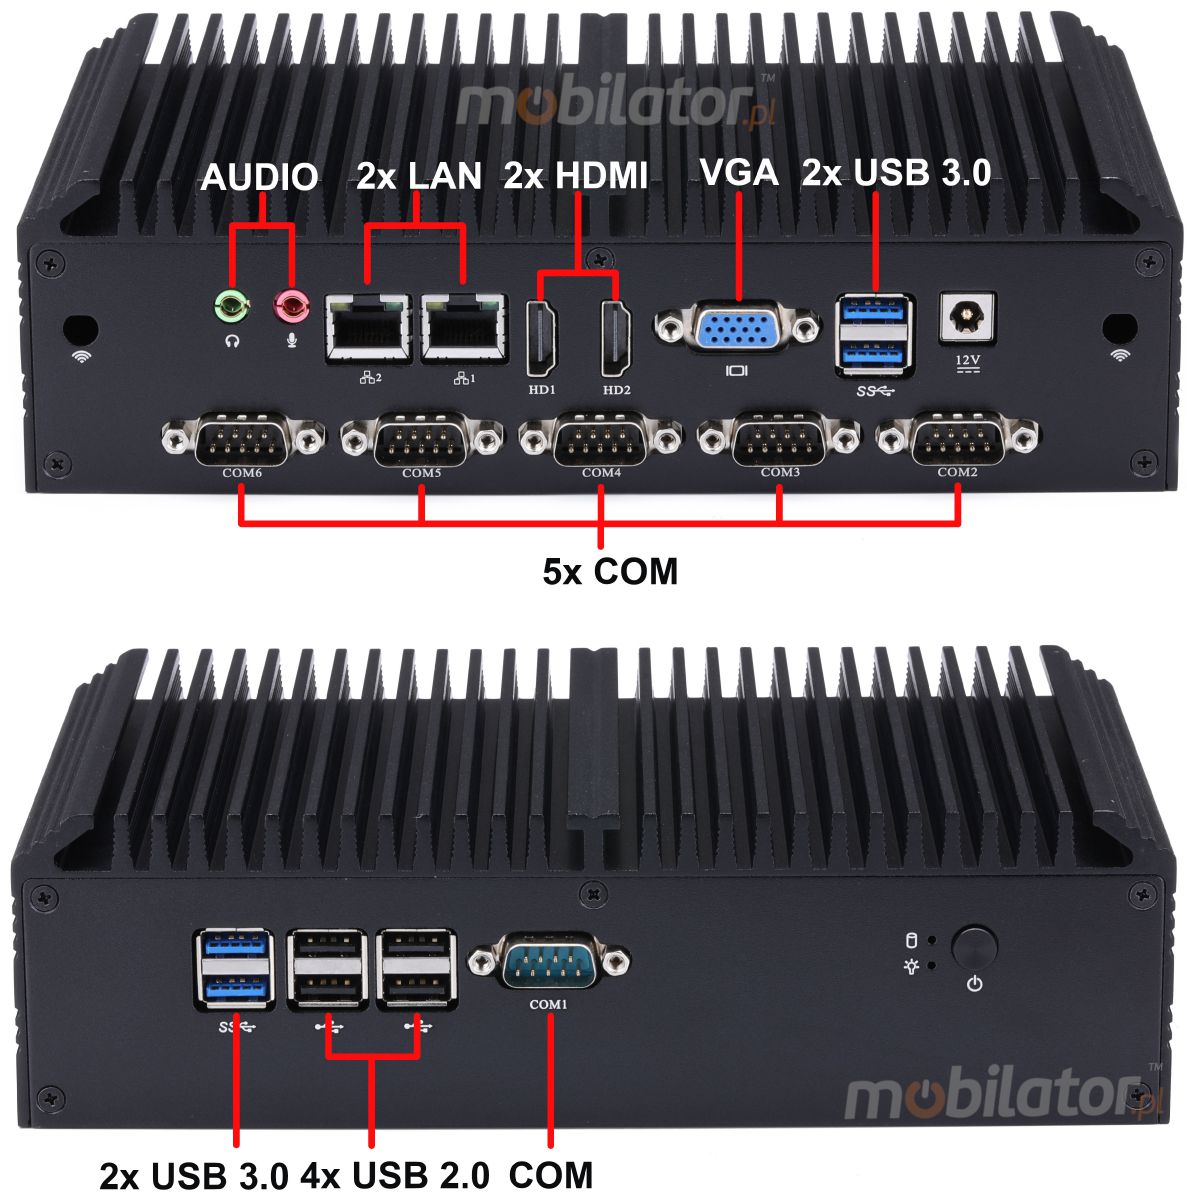 mBox X105 v.3 - Industrial Mini Computer with Intel Celeron 3855U Processor - M.2 disk (with second disk option) - USB 3.0, 2x HDMI and WiFi - Interfaces